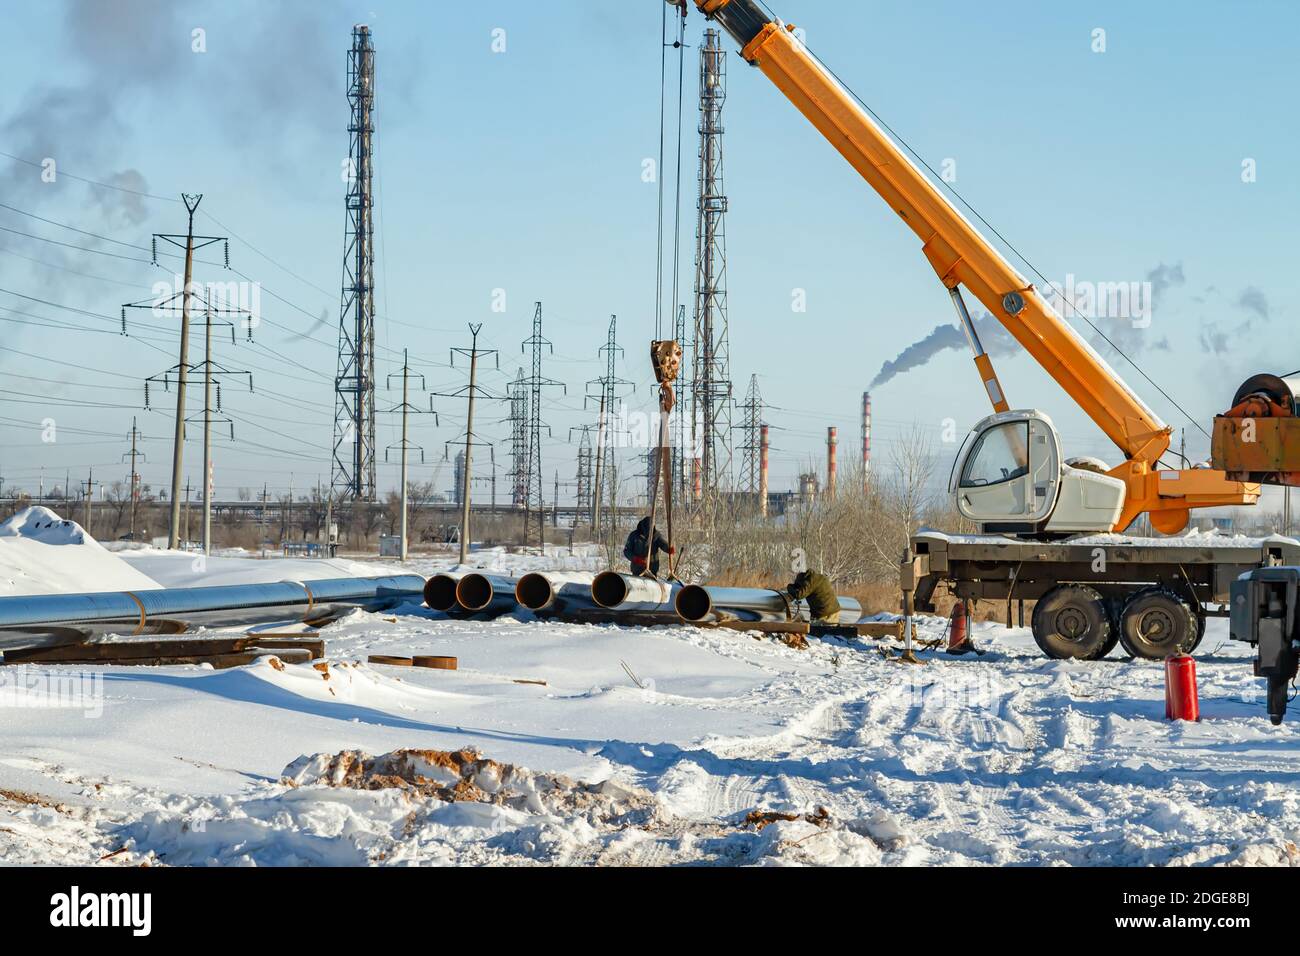 Construction work on pipe laying of pipeline into the trench using a crane Stock Photo